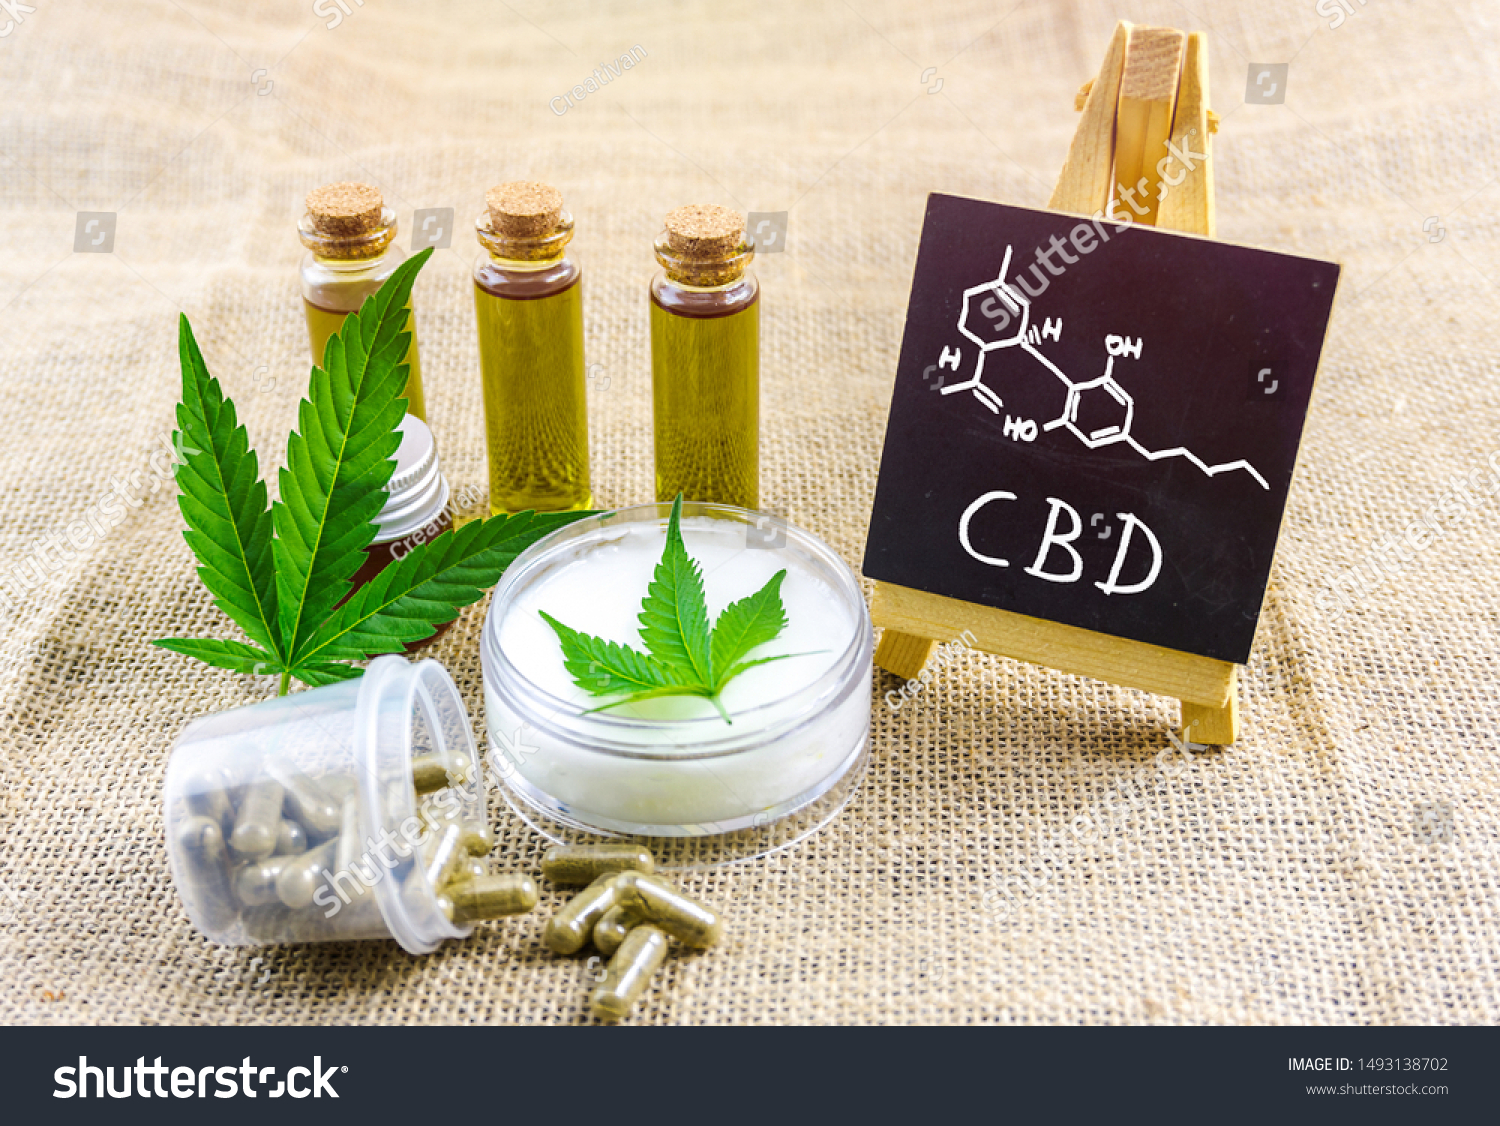 Full spectrum CBD and THC cannabis oils, pills and cbd lotion on hemp cloth with chemical structure on blackboard #1493138702